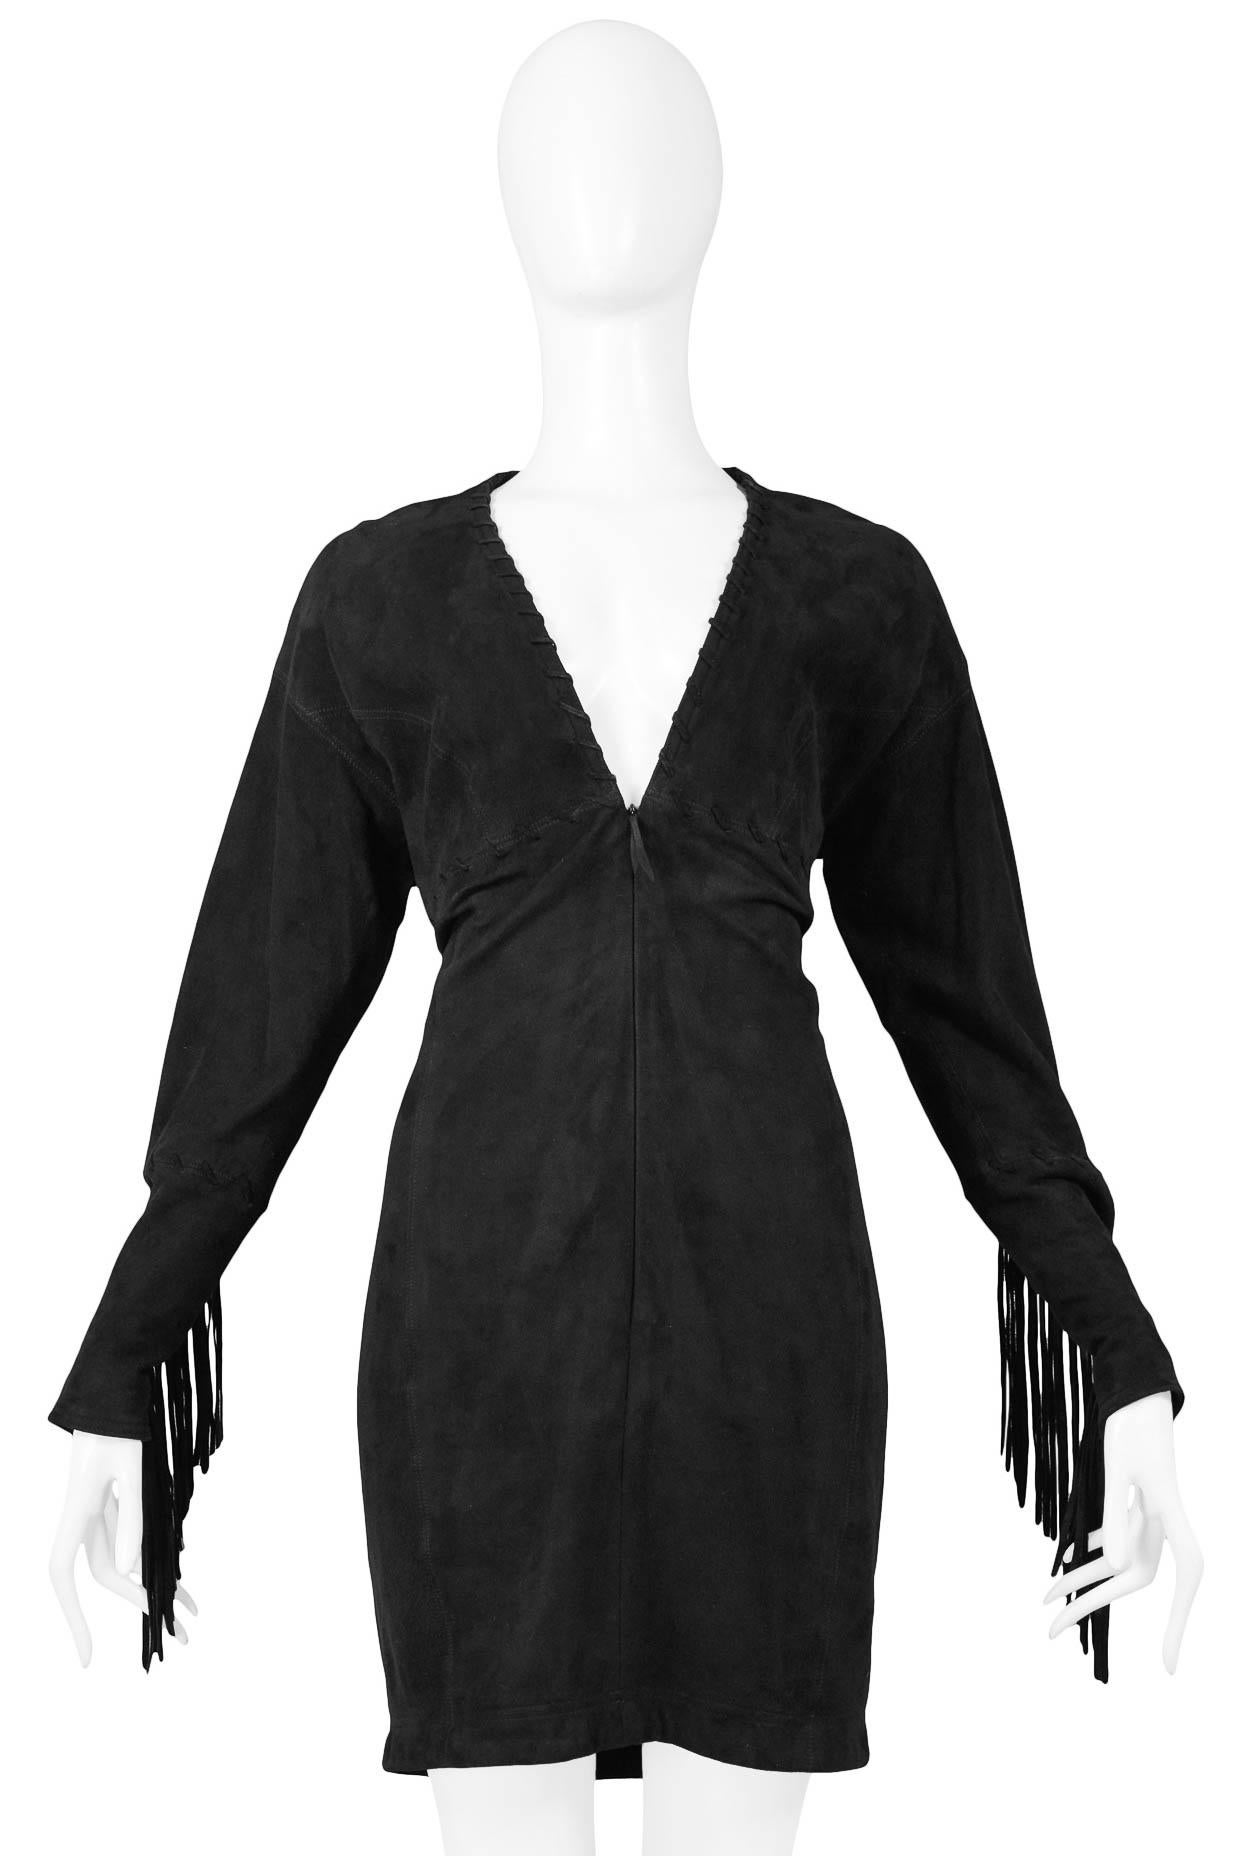 Issac Mizrahi Black Leather Suede Dress 1989 In Excellent Condition For Sale In Los Angeles, CA